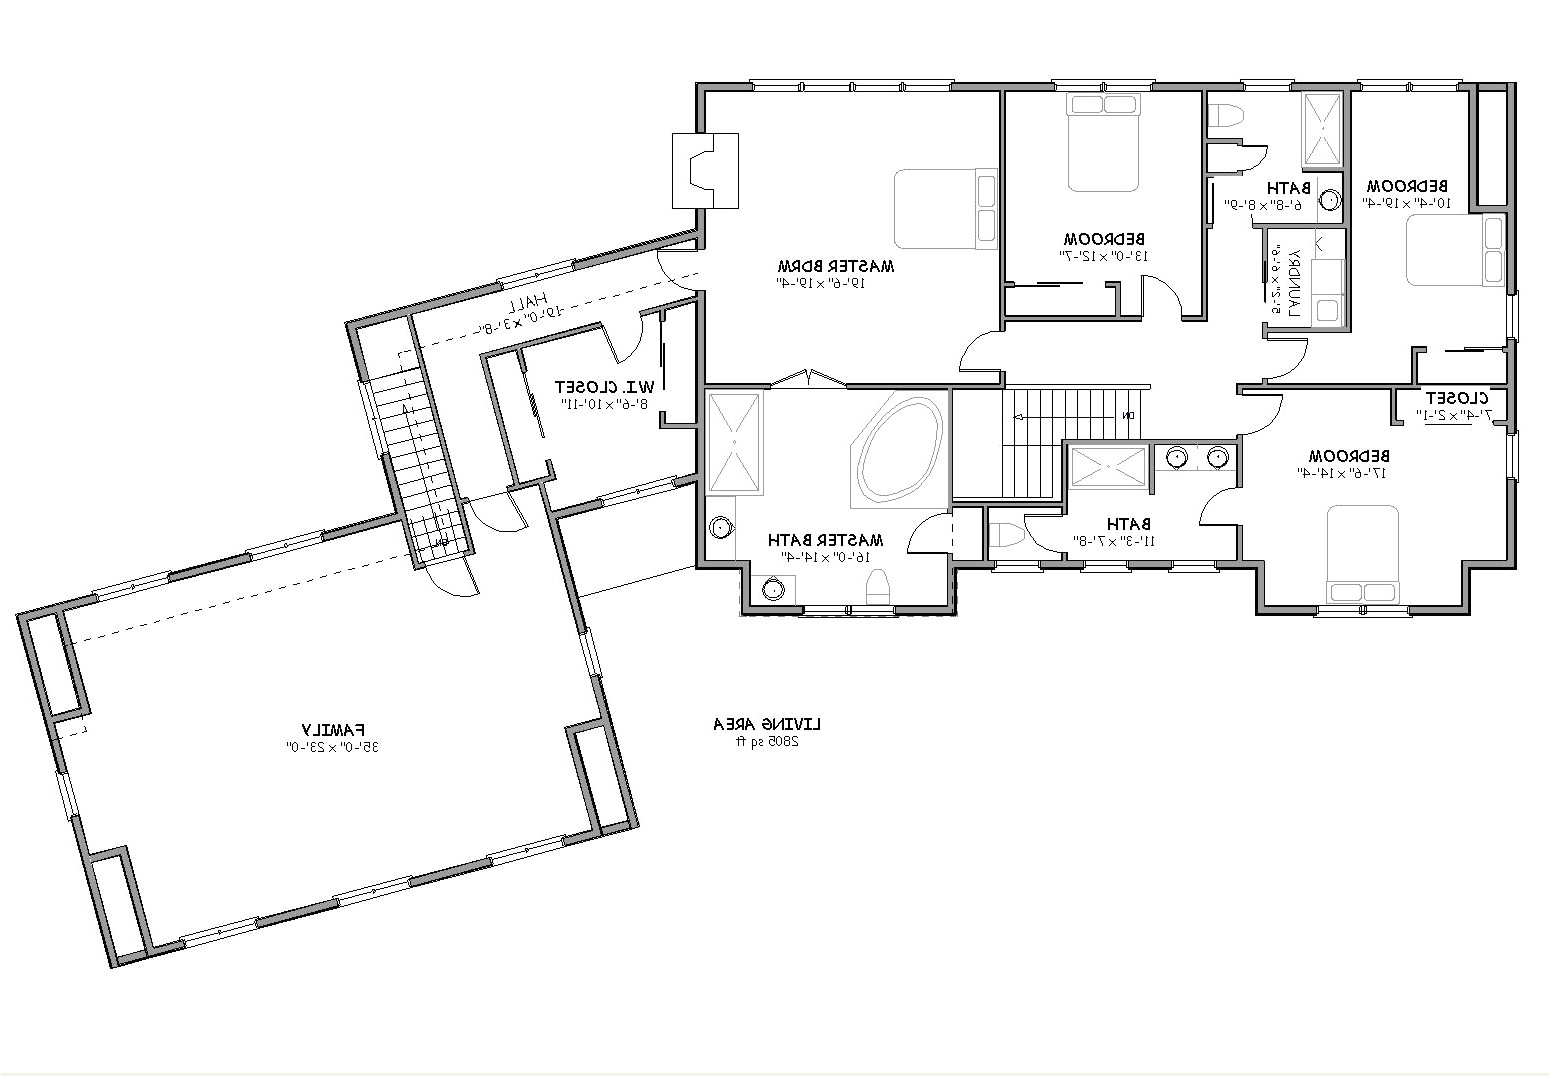 5000 Square Foot Home Plans Captivating 5000 Square Foot House Plans Photos Best